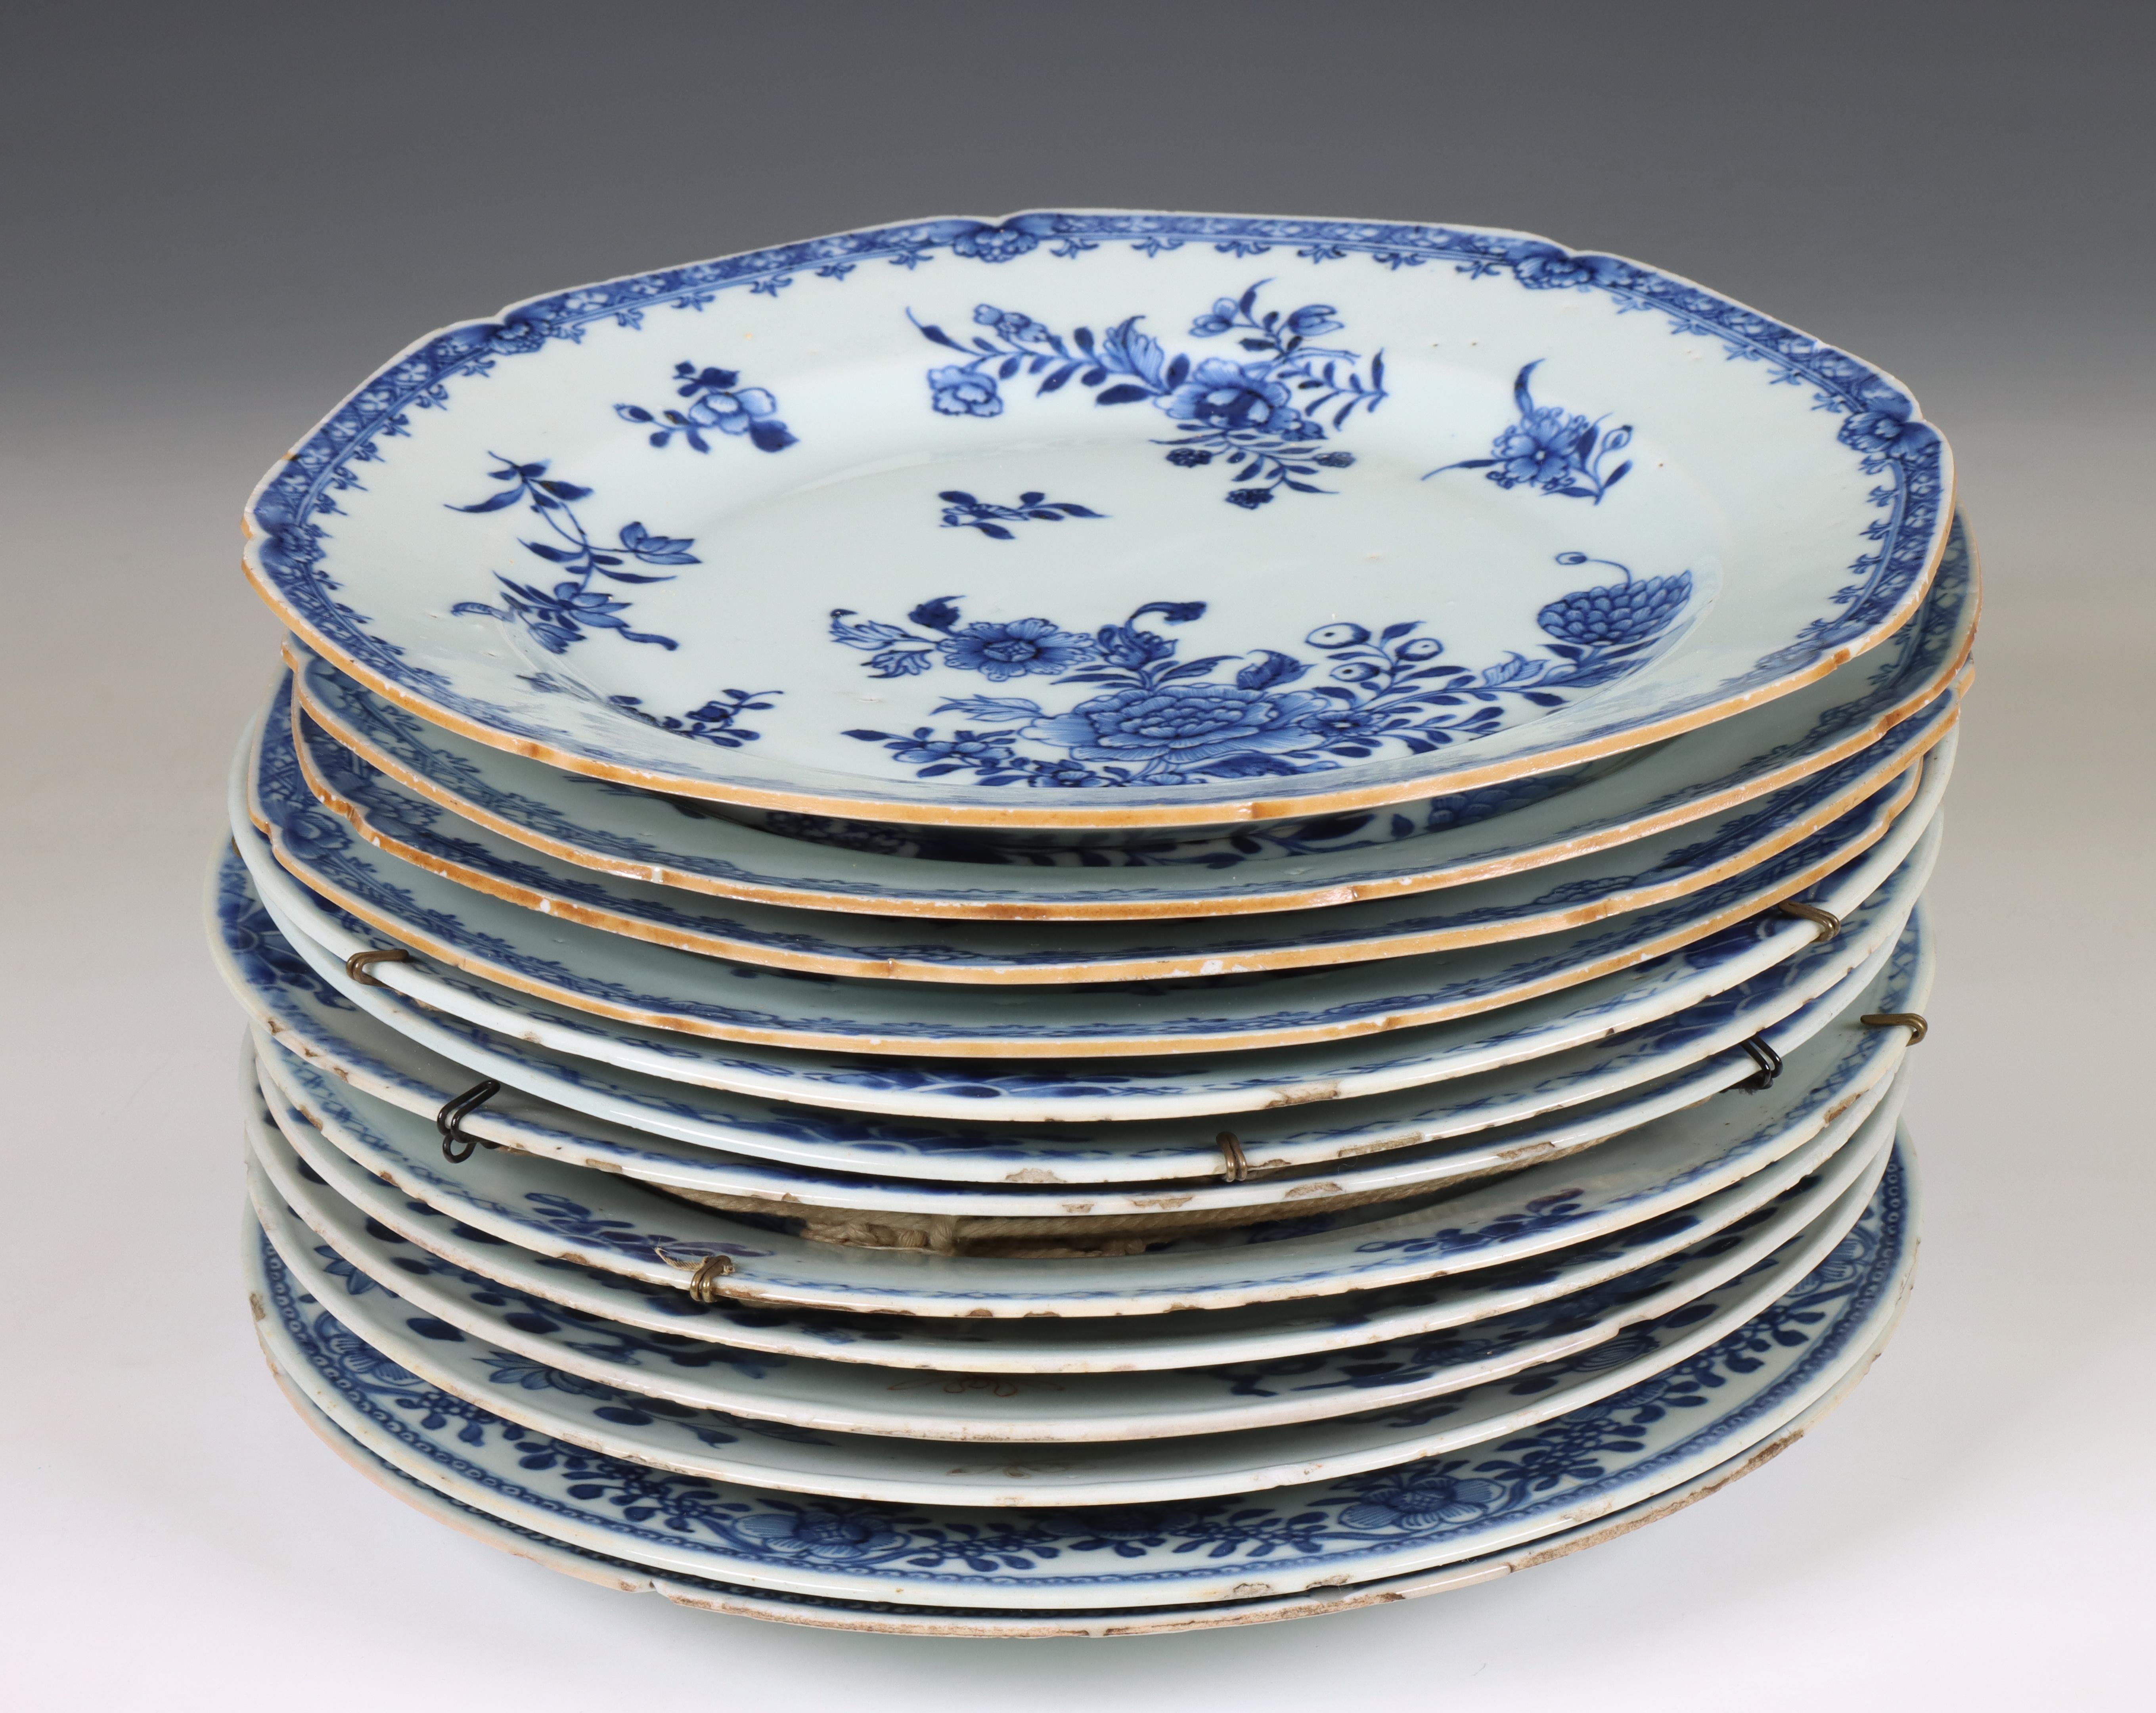 China, a collection of blue and white porcelain plates, Qianlong period (1736-1795), - Image 2 of 3